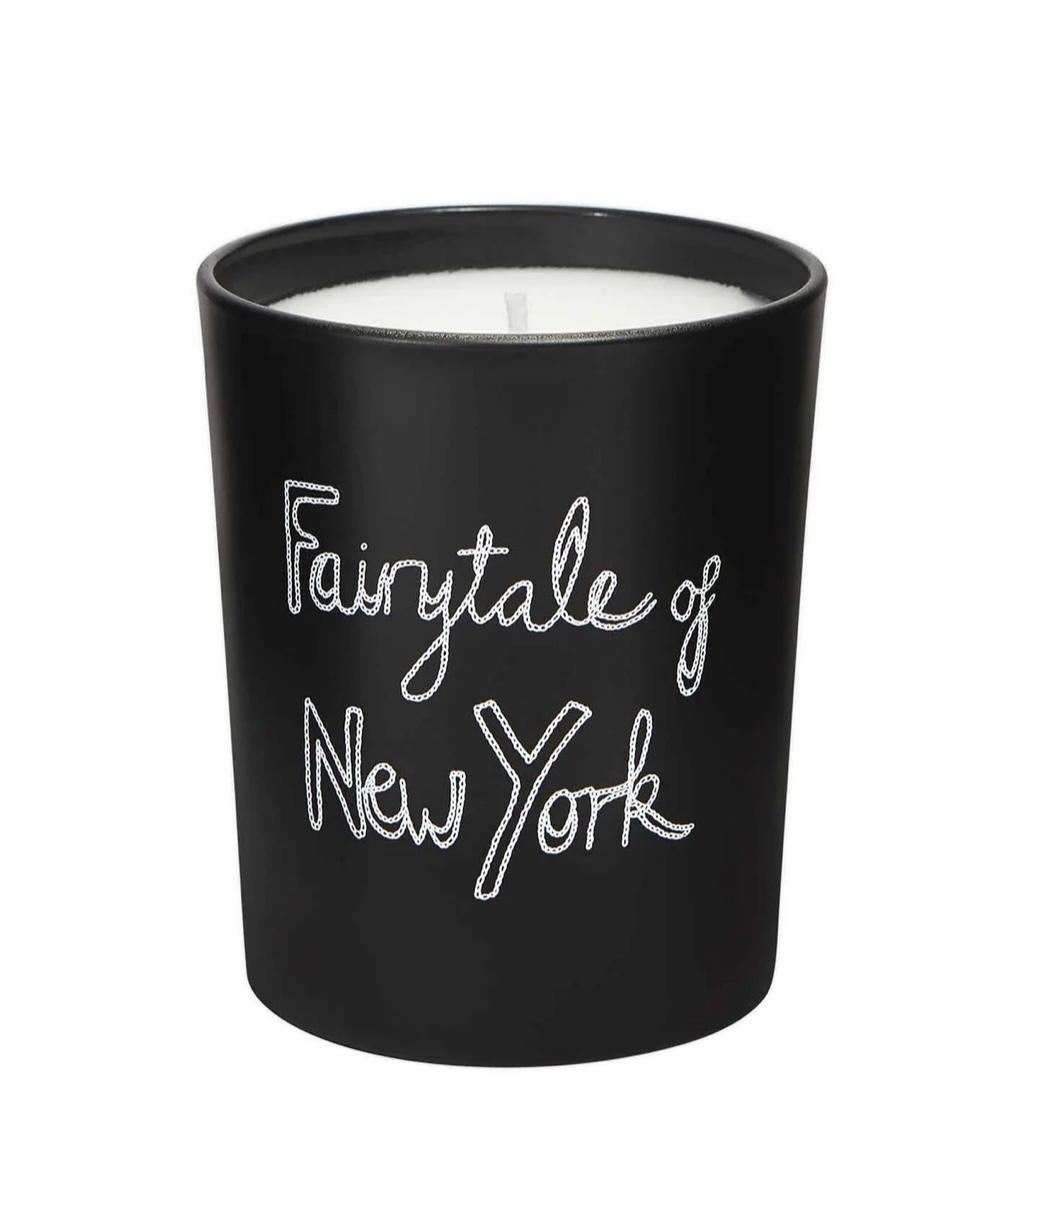 Fairytale of New York Candle By Bella Freud